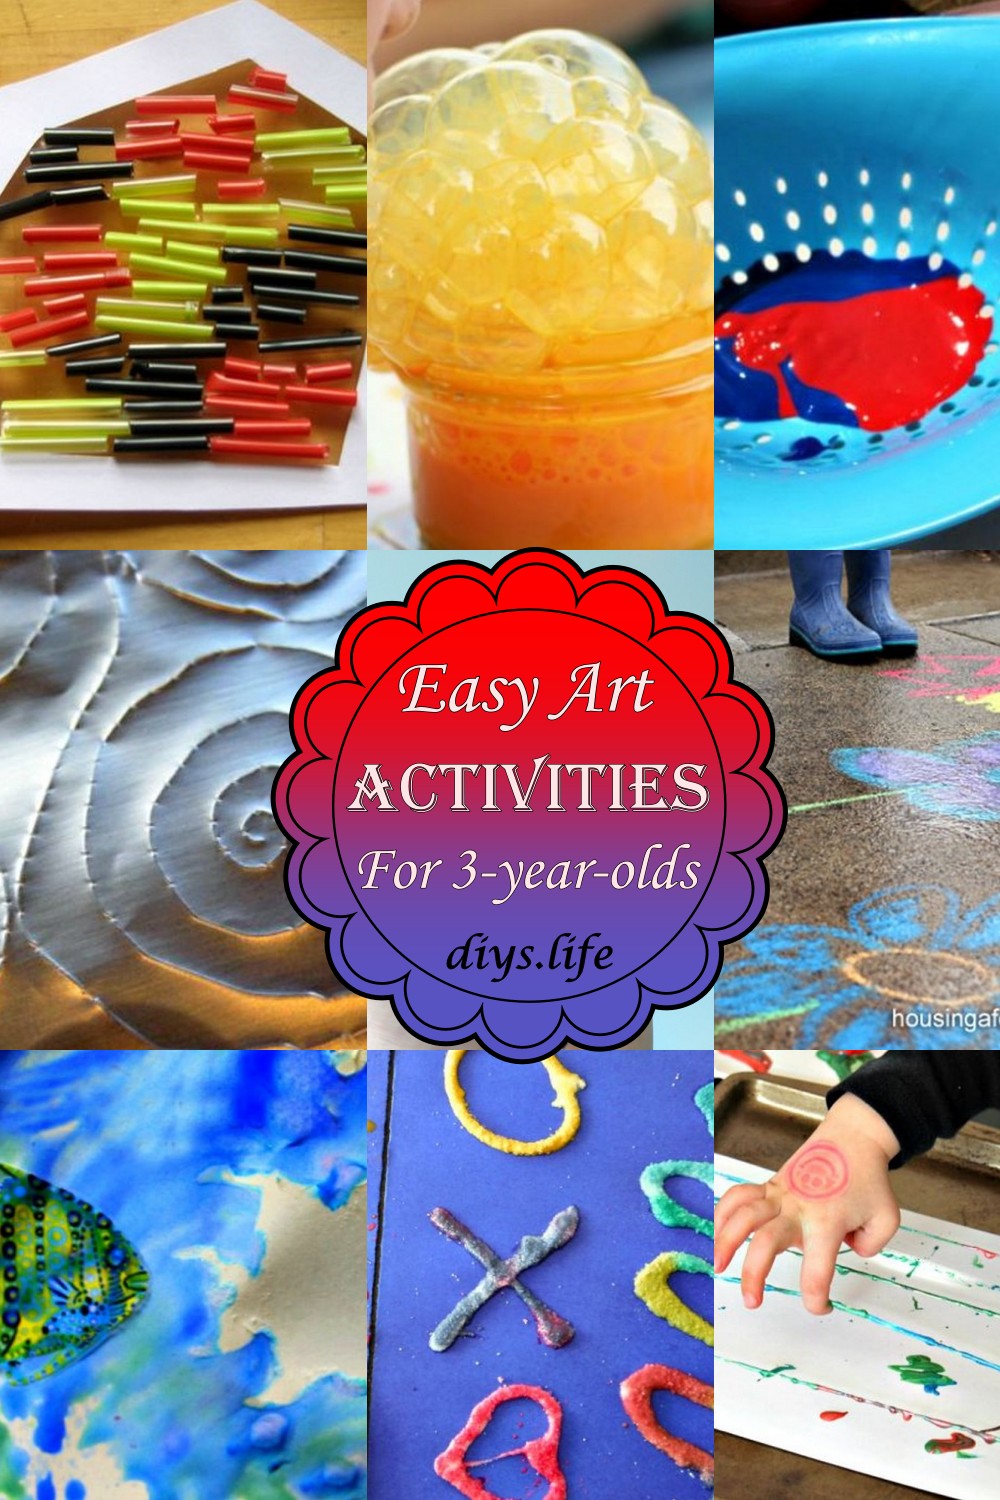 Easy Art Activities For 3-year-olds